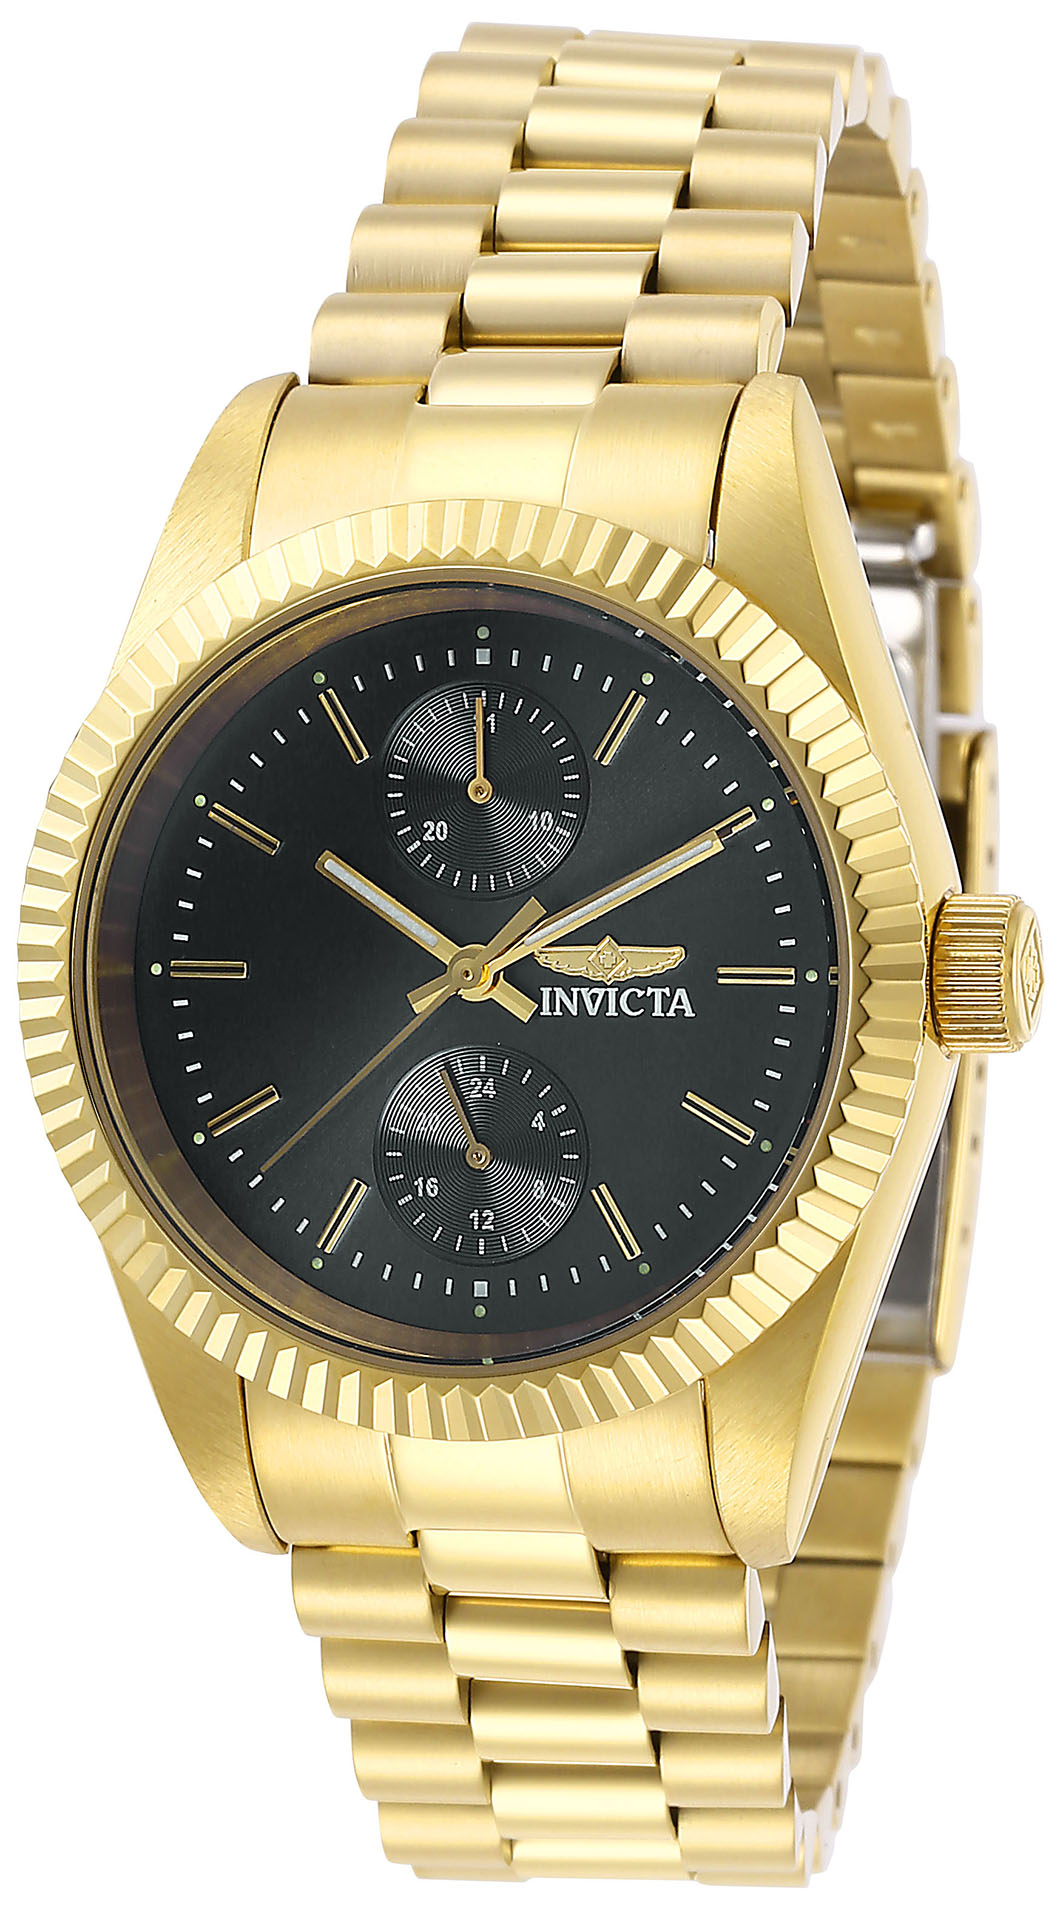 Invicta Specialty Women's Watch - 36mm, Gold (29444)